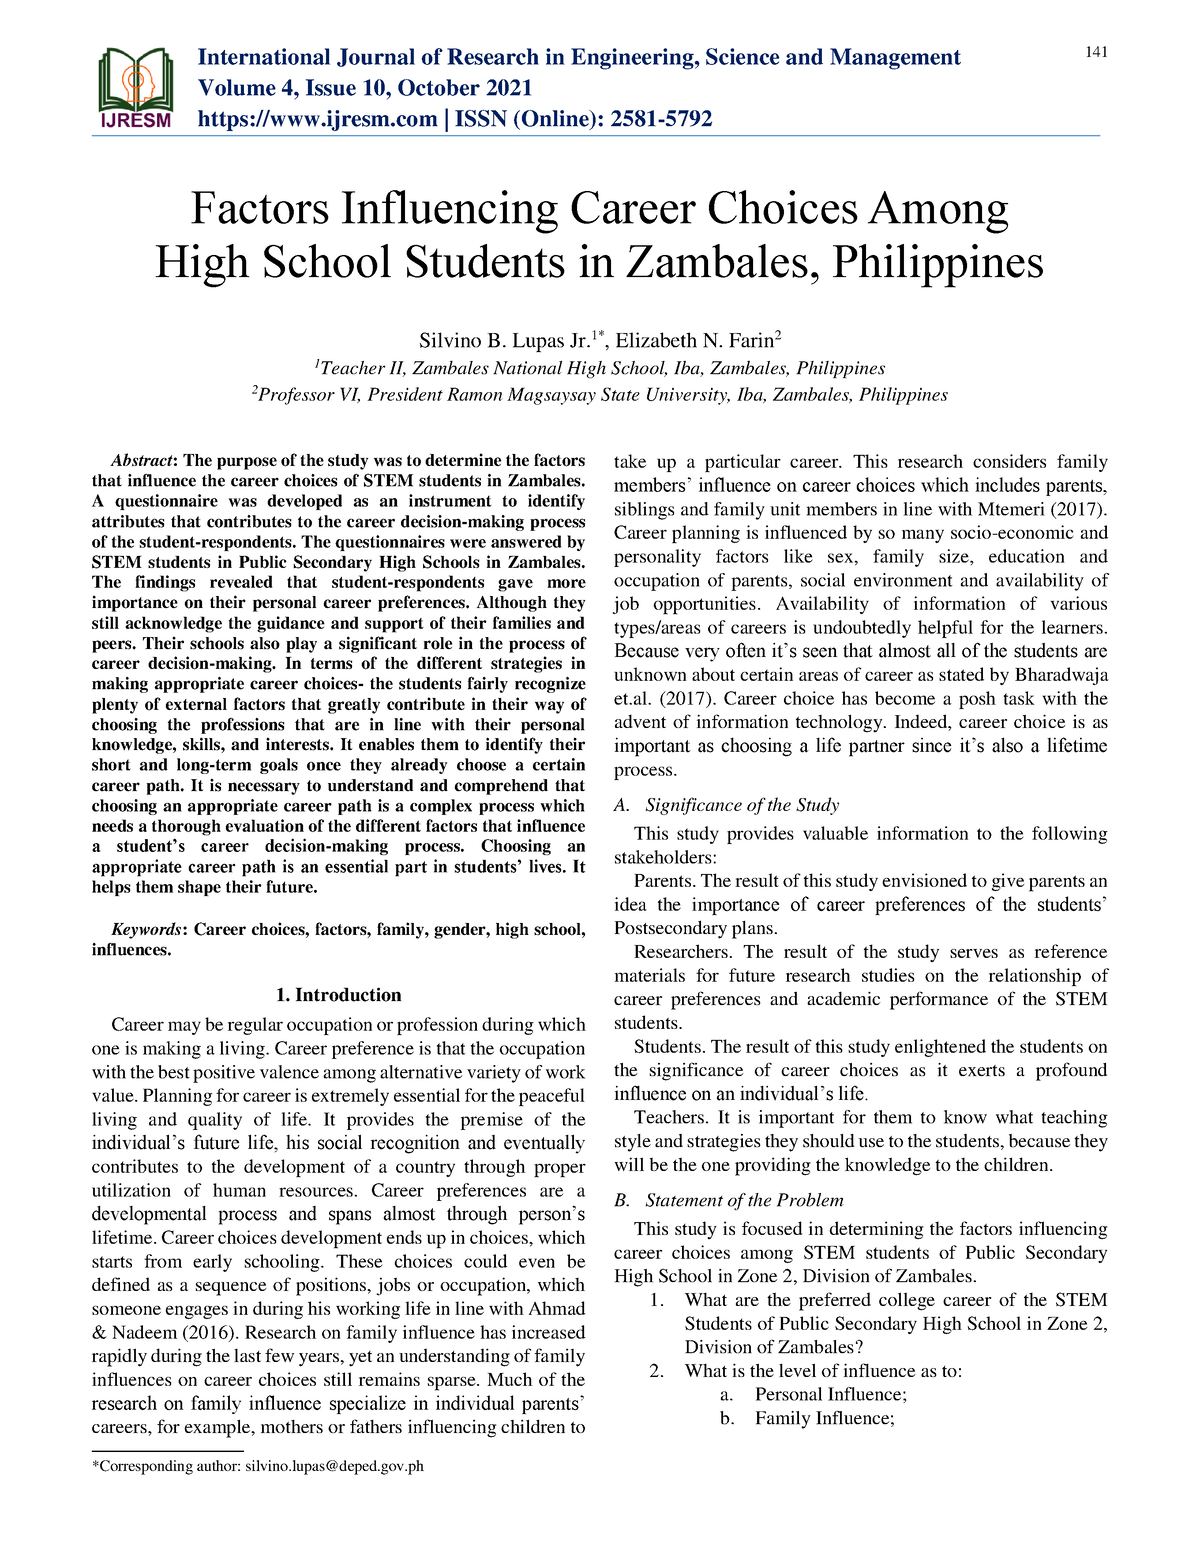 research paper about student career choosing